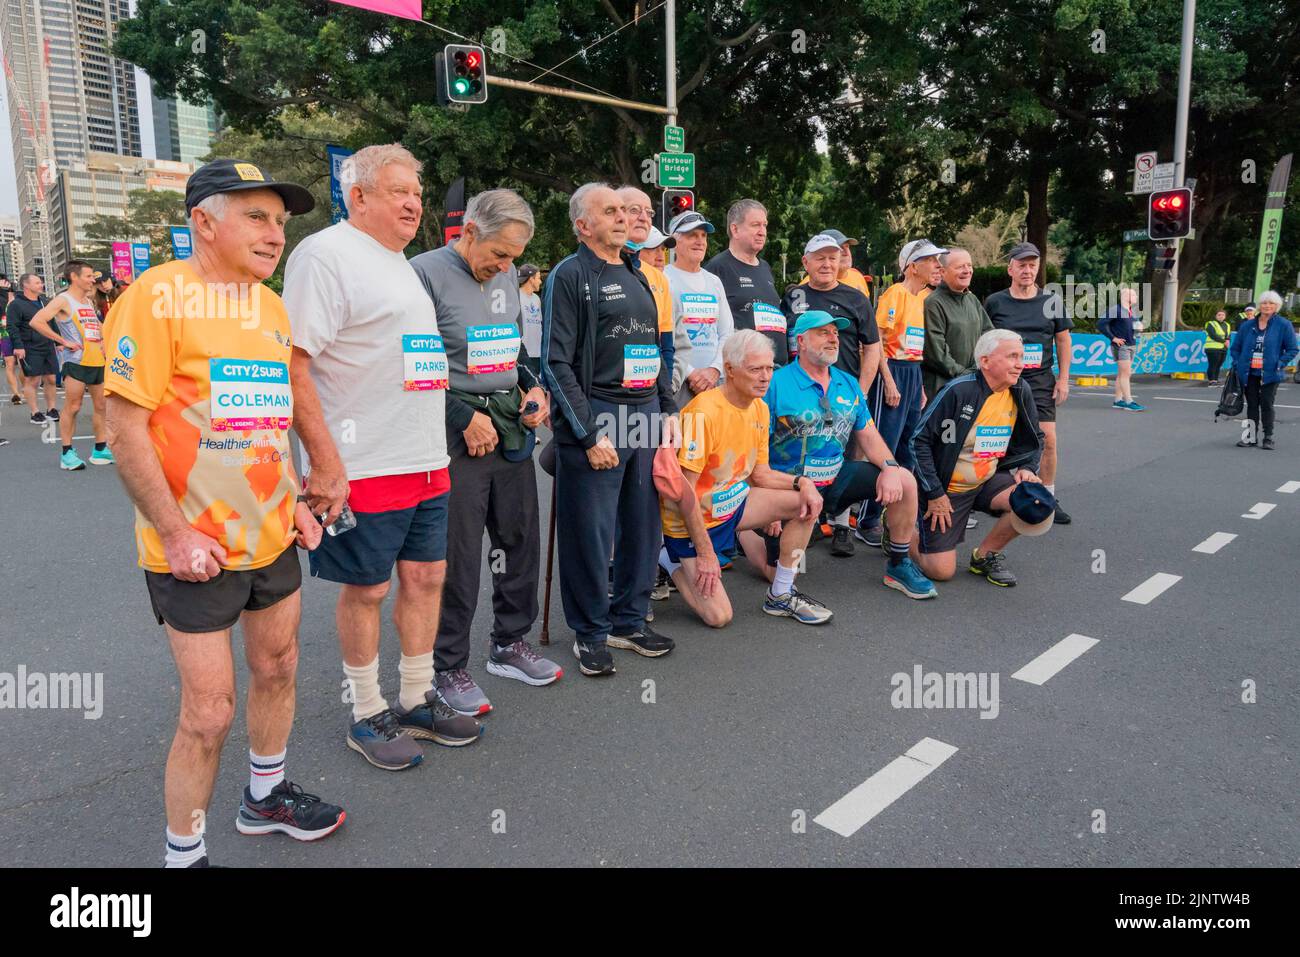 Sydney, Australia.14 August 2022: Some 60,000+ people are taking part in the 50th City2Surf race in Sydney, the first since 2019 after cancellations in 2020 and 2021 due to Covid-19 restrictions. The fourteen-kilometre race, the largest of its kind in the world, leads runners from Hyde Park out of the city, up and over heart break hill and on to Bondi Beach. Pictured: “The Legends” runners who have taken part in every event since the start in 1971 Credit: Stephen Dwyer / Alamy Live News Stock Photo